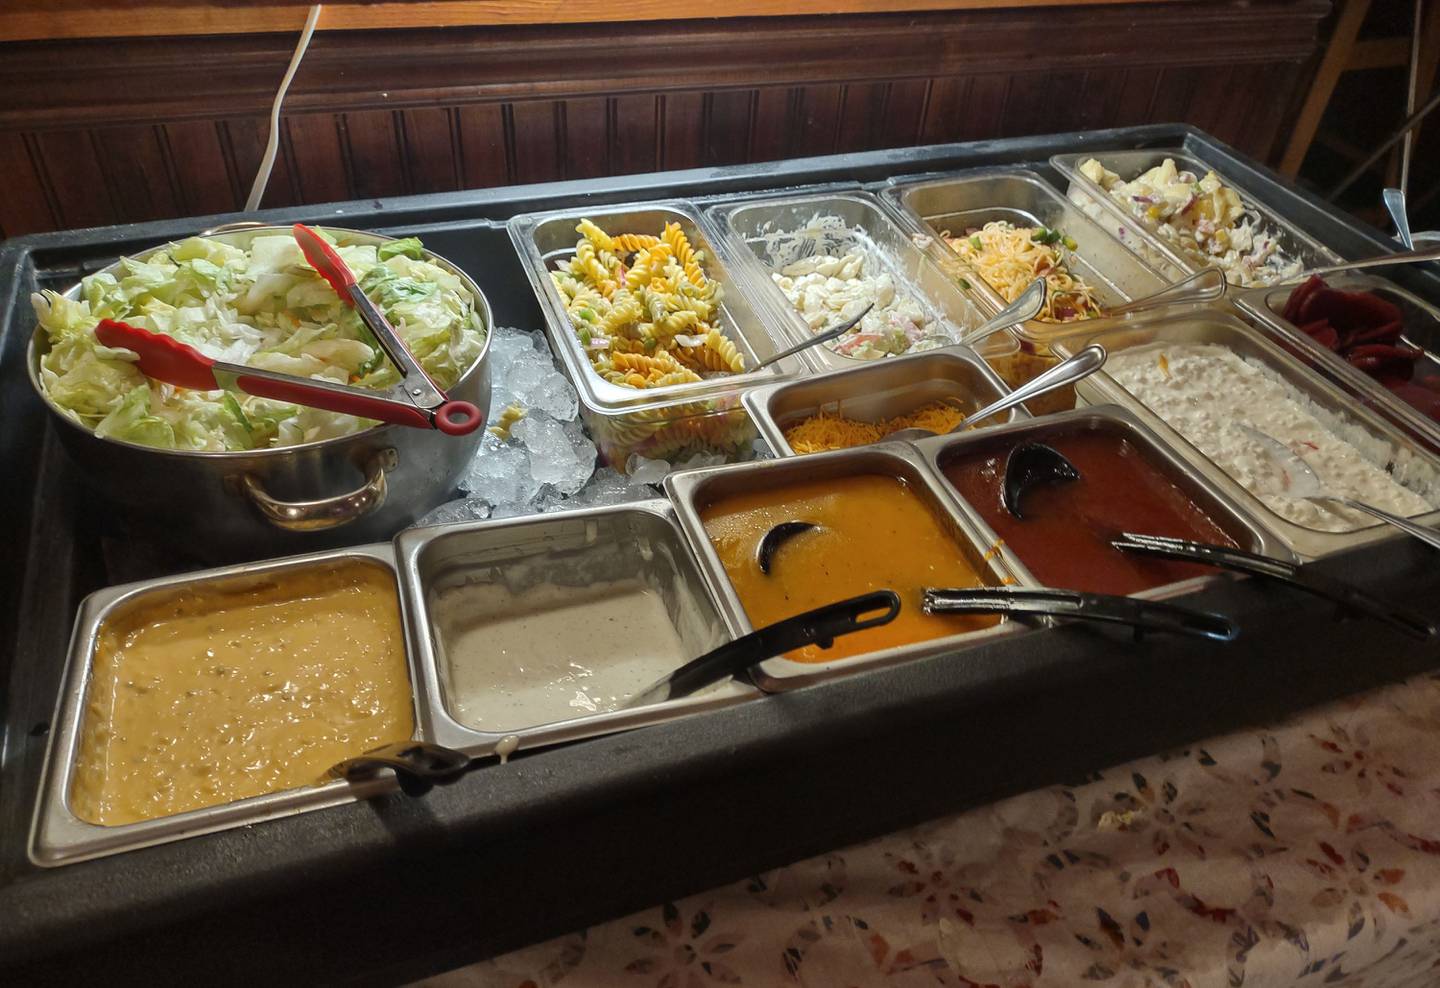 Most dinners include access to the salad bar at Softails Bar and Grill in Ladd. Offerings can include a leafy green salad, a variety of pasta salads, cottage cheese and pickled beets.